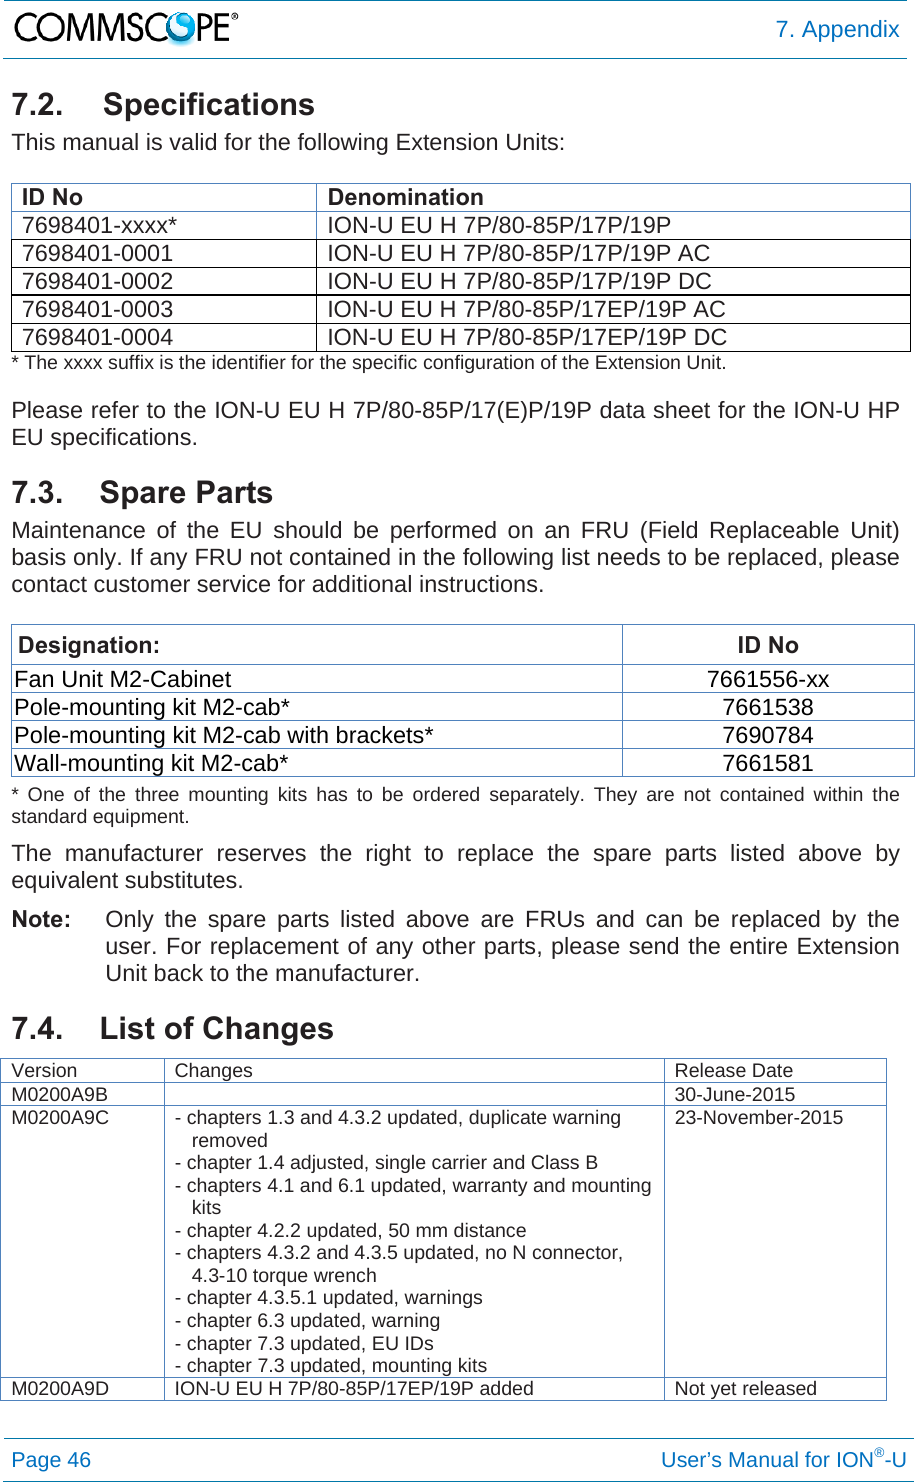  7. Appendix Page 46     User’s Manual for ION®-U 7.2. Specifications This manual is valid for the following Extension Units:  ID No  Denomination 7698401-xxxx*  ION-U EU H 7P/80-85P/17P/19P 7698401-0001  ION-U EU H 7P/80-85P/17P/19P AC 7698401-0002  ION-U EU H 7P/80-85P/17P/19P DC 7698401-0003  ION-U EU H 7P/80-85P/17EP/19P AC 7698401-0004  ION-U EU H 7P/80-85P/17EP/19P DC * The xxxx suffix is the identifier for the specific configuration of the Extension Unit.  Please refer to the ION-U EU H 7P/80-85P/17(E)P/19P data sheet for the ION-U HP EU specifications. 7.3. Spare Parts Maintenance of the EU should be performed on an FRU (Field Replaceable Unit) basis only. If any FRU not contained in the following list needs to be replaced, please contact customer service for additional instructions.  Designation: ID No Fan Unit M2-Cabinet  7661556-xx Pole-mounting kit M2-cab*  7661538 Pole-mounting kit M2-cab with brackets*  7690784 Wall-mounting kit M2-cab*  7661581 * One of the three mounting kits has to be ordered separately. They are not contained within the standard equipment. The manufacturer reserves the right to replace the spare parts listed above by equivalent substitutes. Note:  Only the spare parts listed above are FRUs and can be replaced by the user. For replacement of any other parts, please send the entire Extension Unit back to the manufacturer. 7.4. List of Changes Version Changes  Release Date M0200A9B   30-June-2015 M0200A9C  - chapters 1.3 and 4.3.2 updated, duplicate warning removed - chapter 1.4 adjusted, single carrier and Class B - chapters 4.1 and 6.1 updated, warranty and mounting kits - chapter 4.2.2 updated, 50 mm distance - chapters 4.3.2 and 4.3.5 updated, no N connector, 4.3-10 torque wrench - chapter 4.3.5.1 updated, warnings - chapter 6.3 updated, warning - chapter 7.3 updated, EU IDs - chapter 7.3 updated, mounting kits 23-November-2015 M0200A9D  ION-U EU H 7P/80-85P/17EP/19P added  Not yet released  